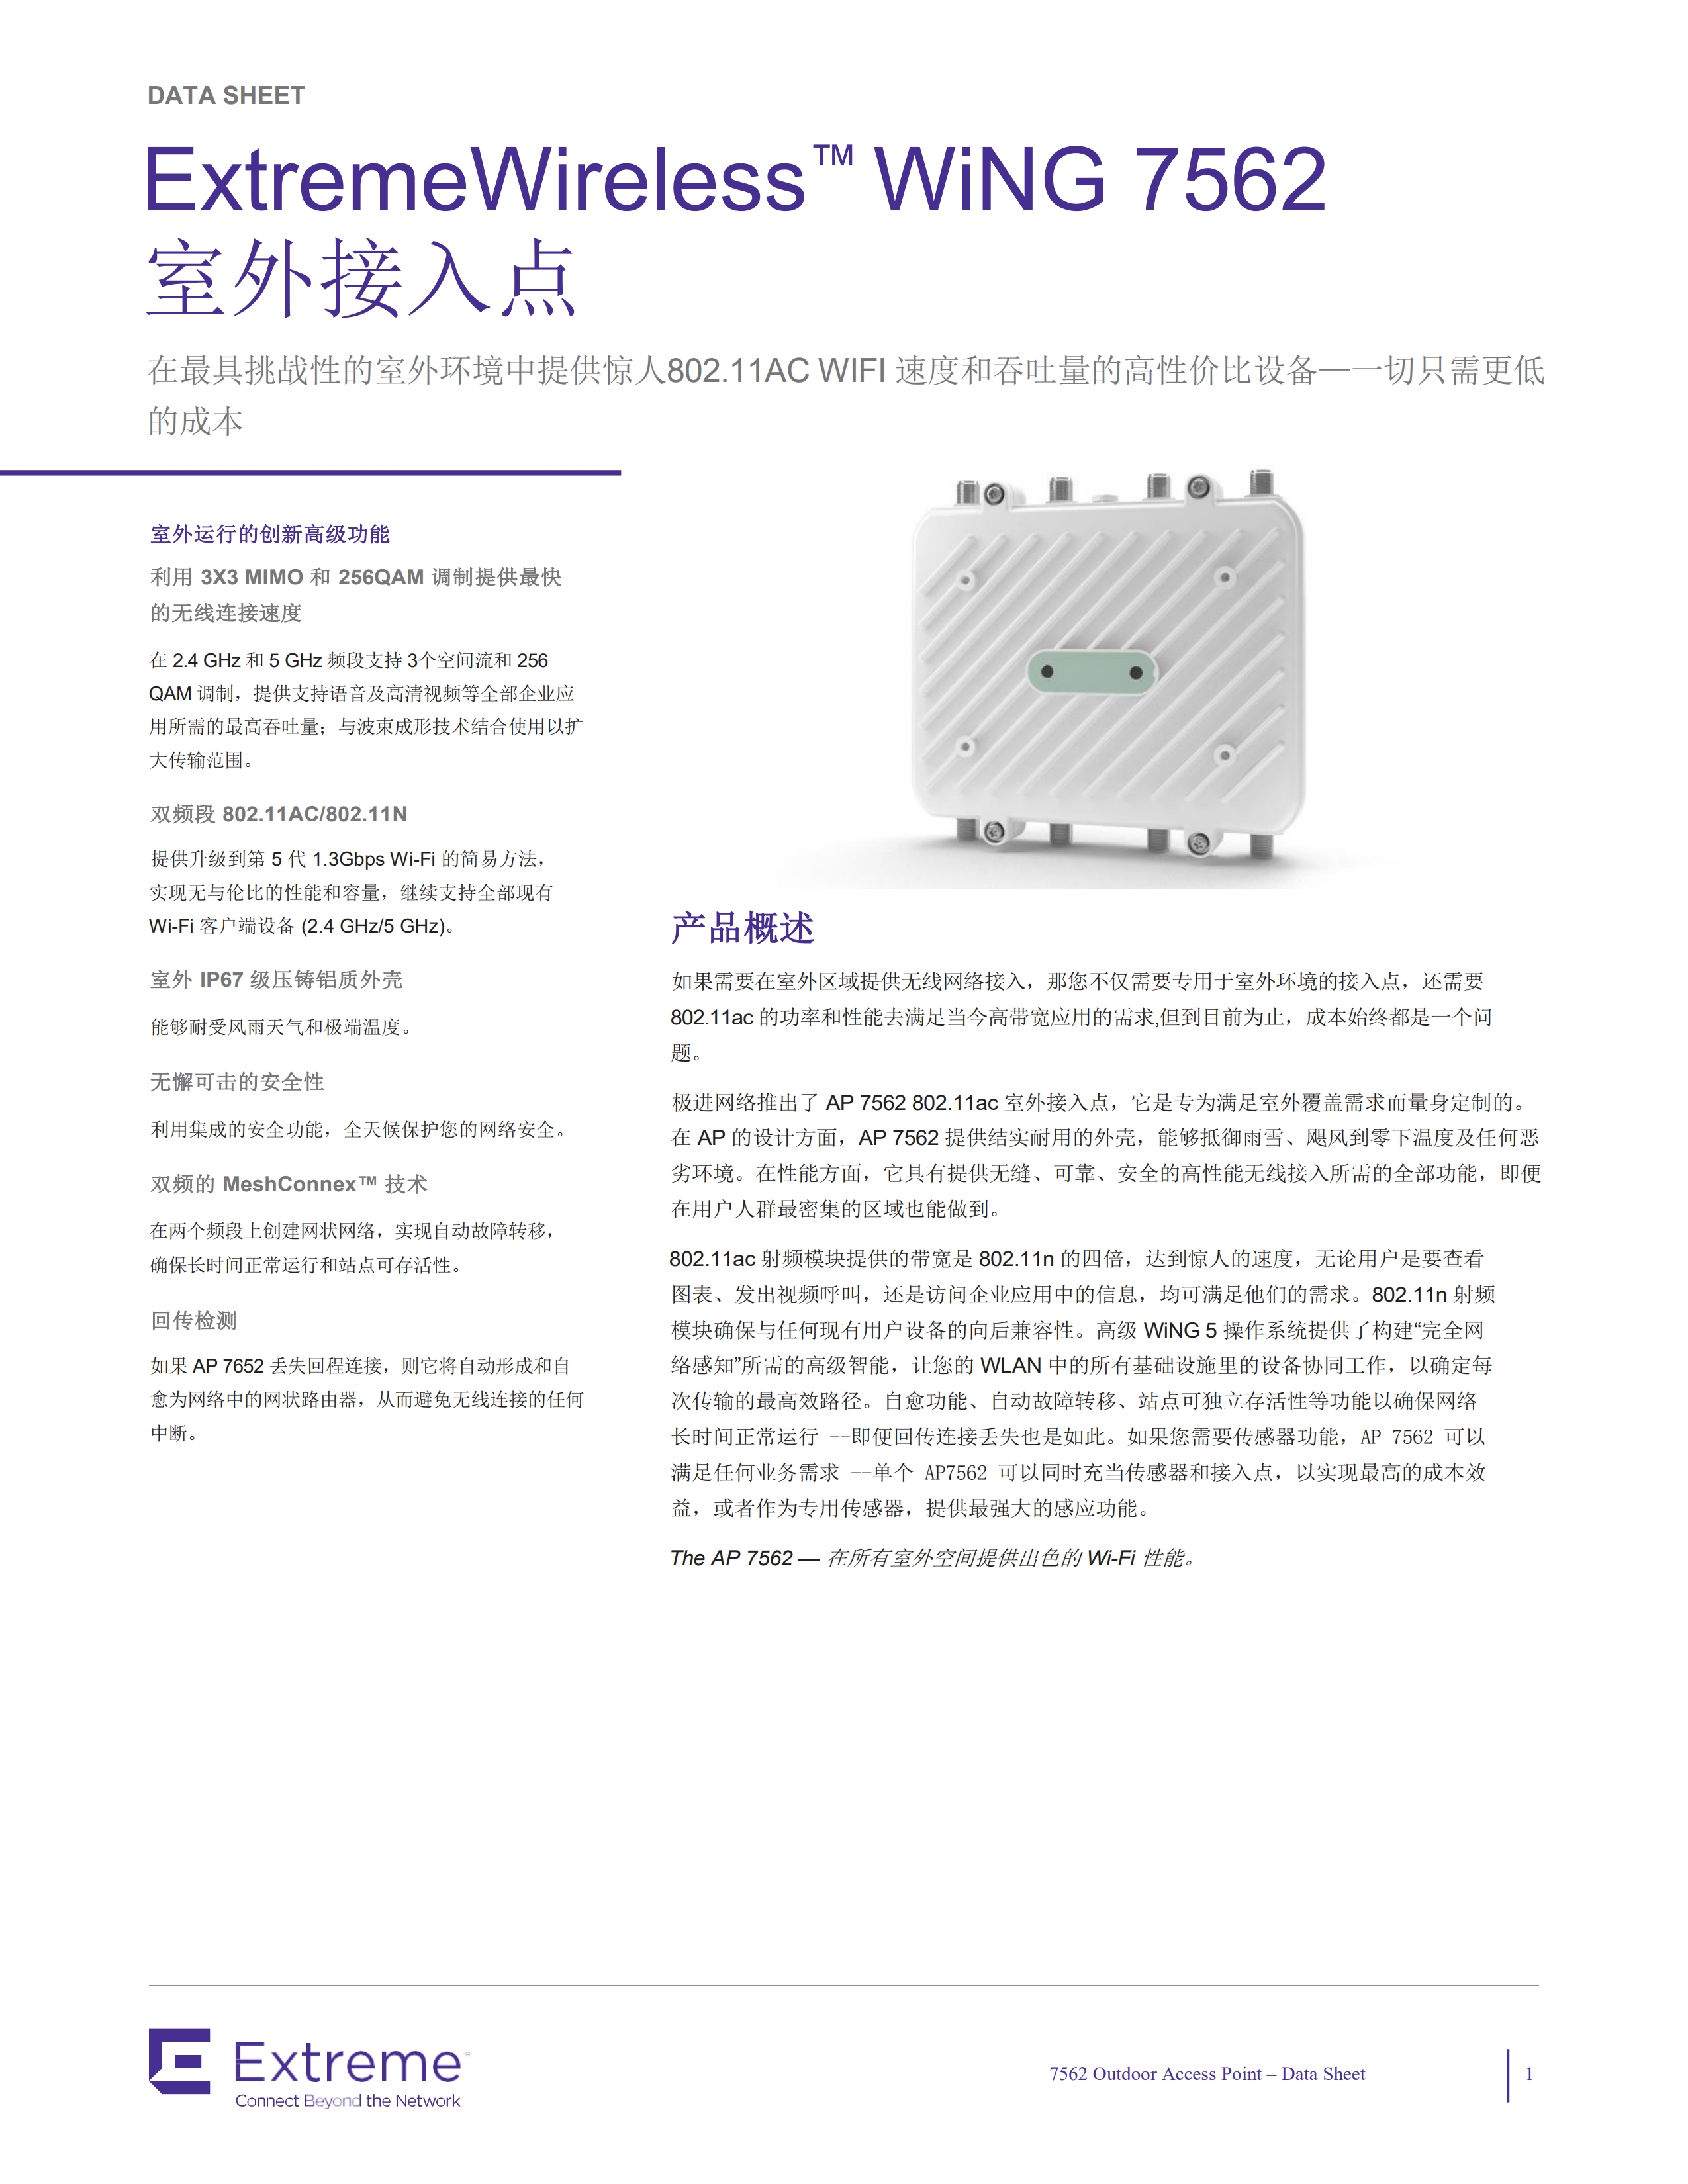 ExtremeWireless-WiNG-7622-Access-Point-DS